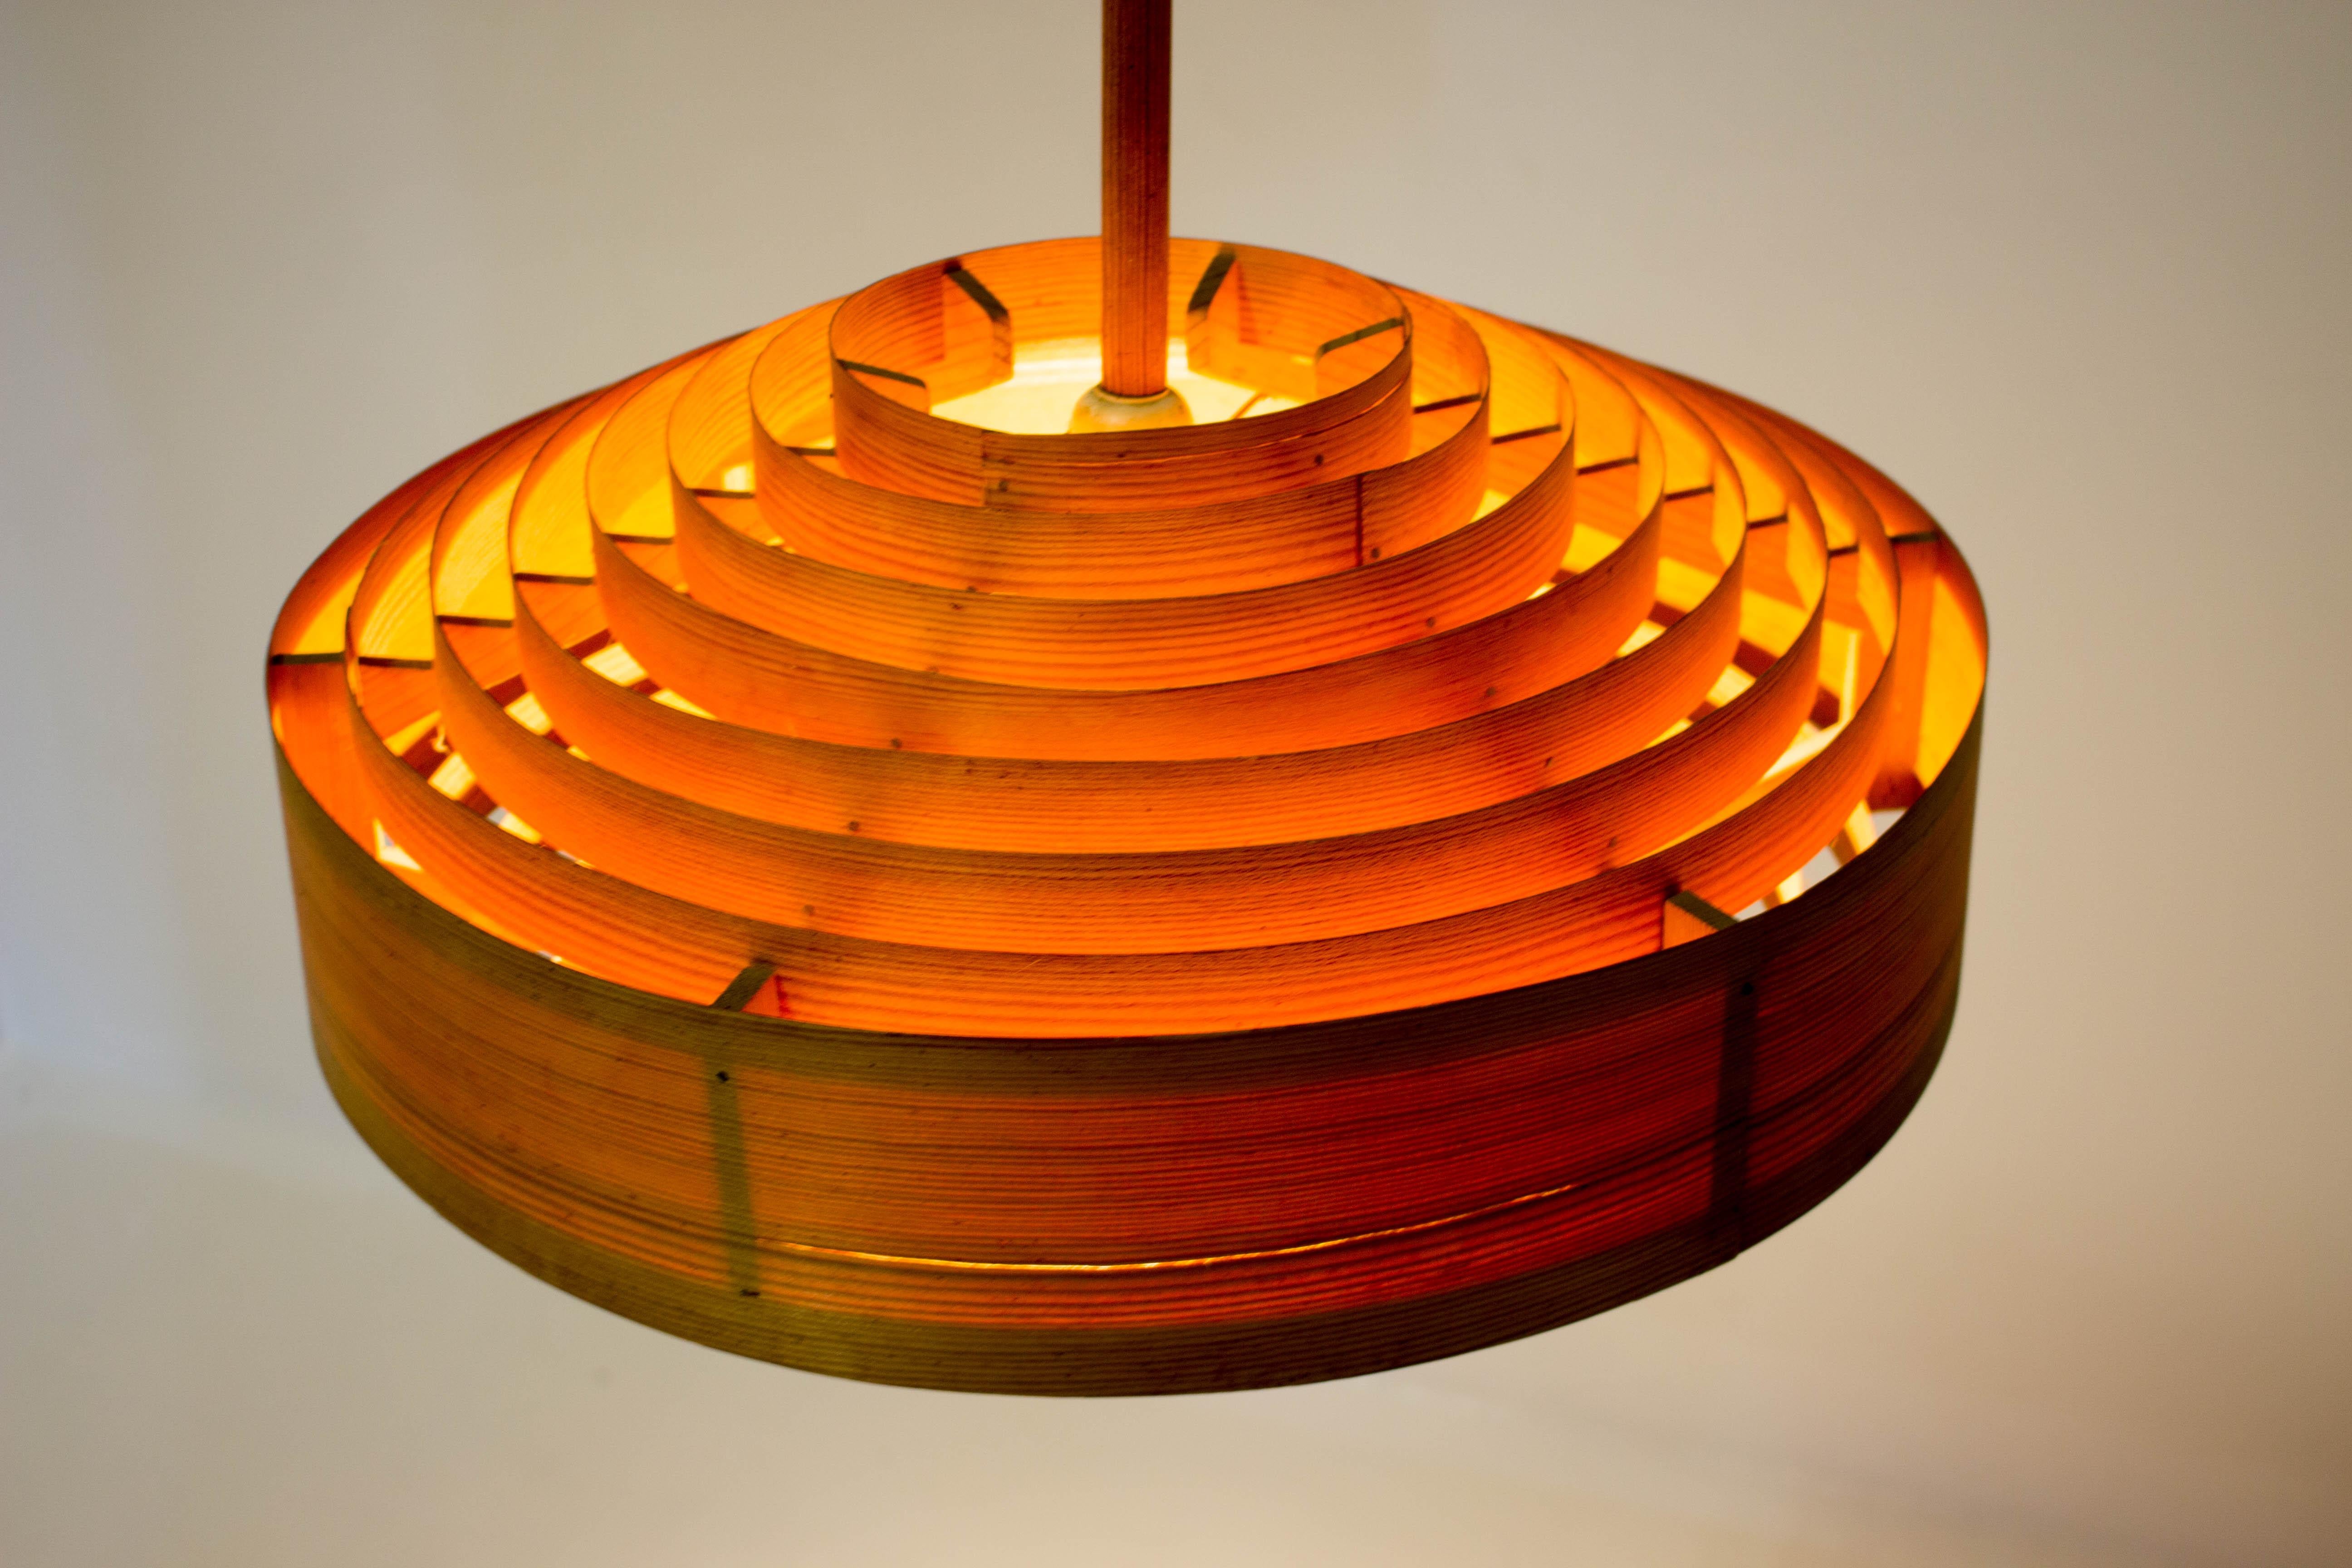 1960s Hans-Agne Jakobsson wooden pendant lamp for AB Ellysett Markaryd, Sweden.
One crack seen on photos has no effect on function
1x60W, E27 or E26 bulb
Max total height 180cm.